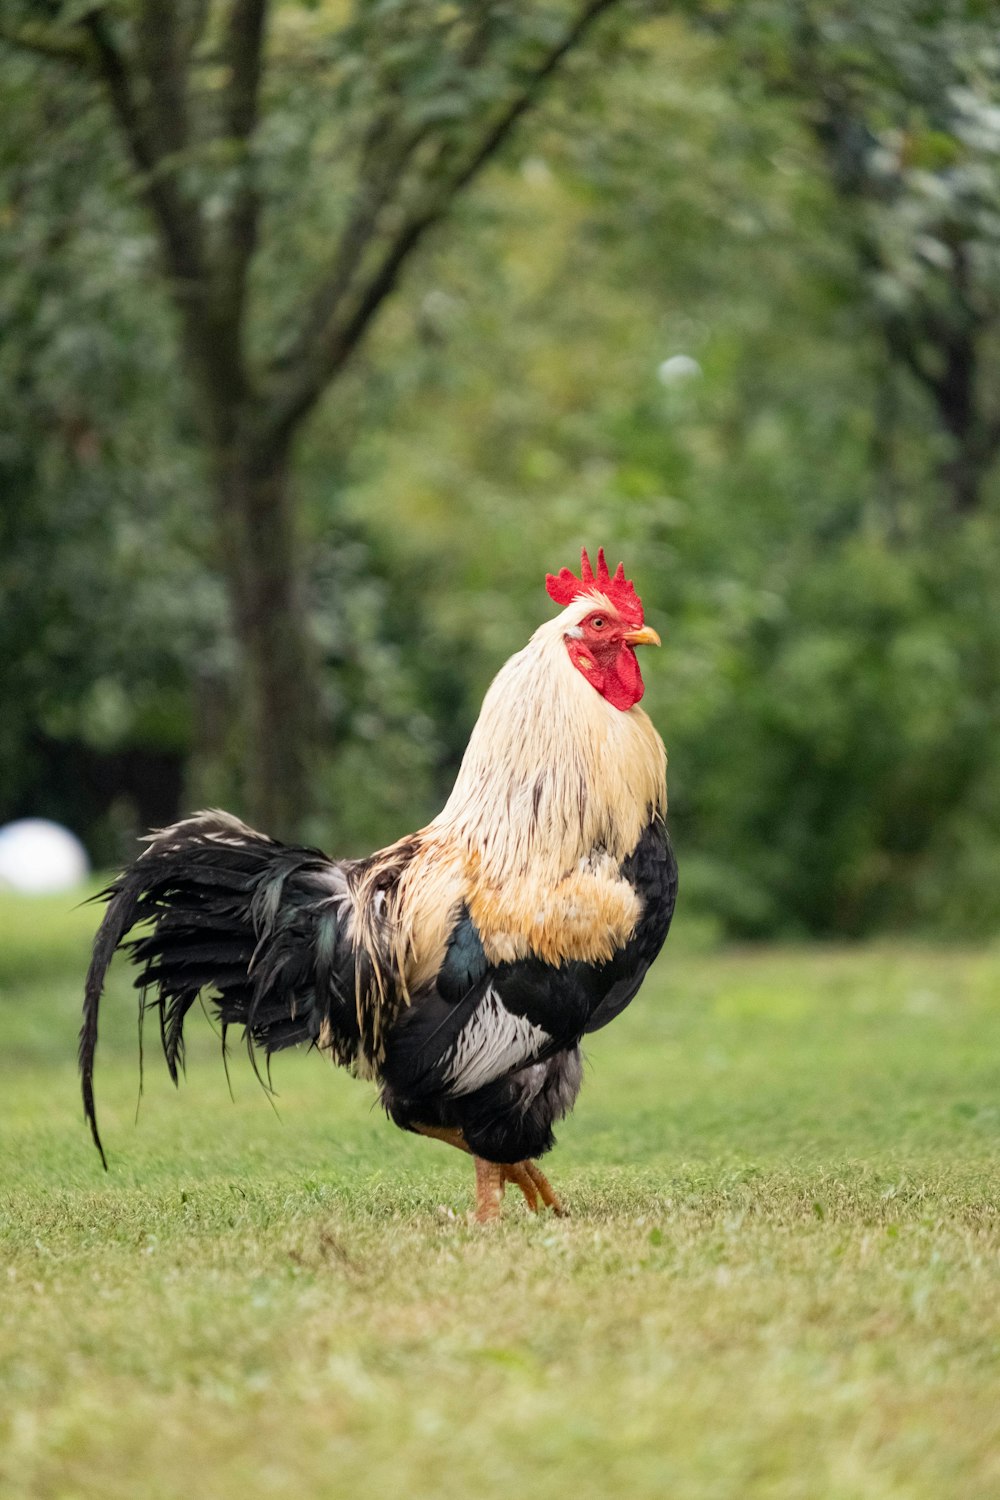 a rooster standing in the grass with trees in the background